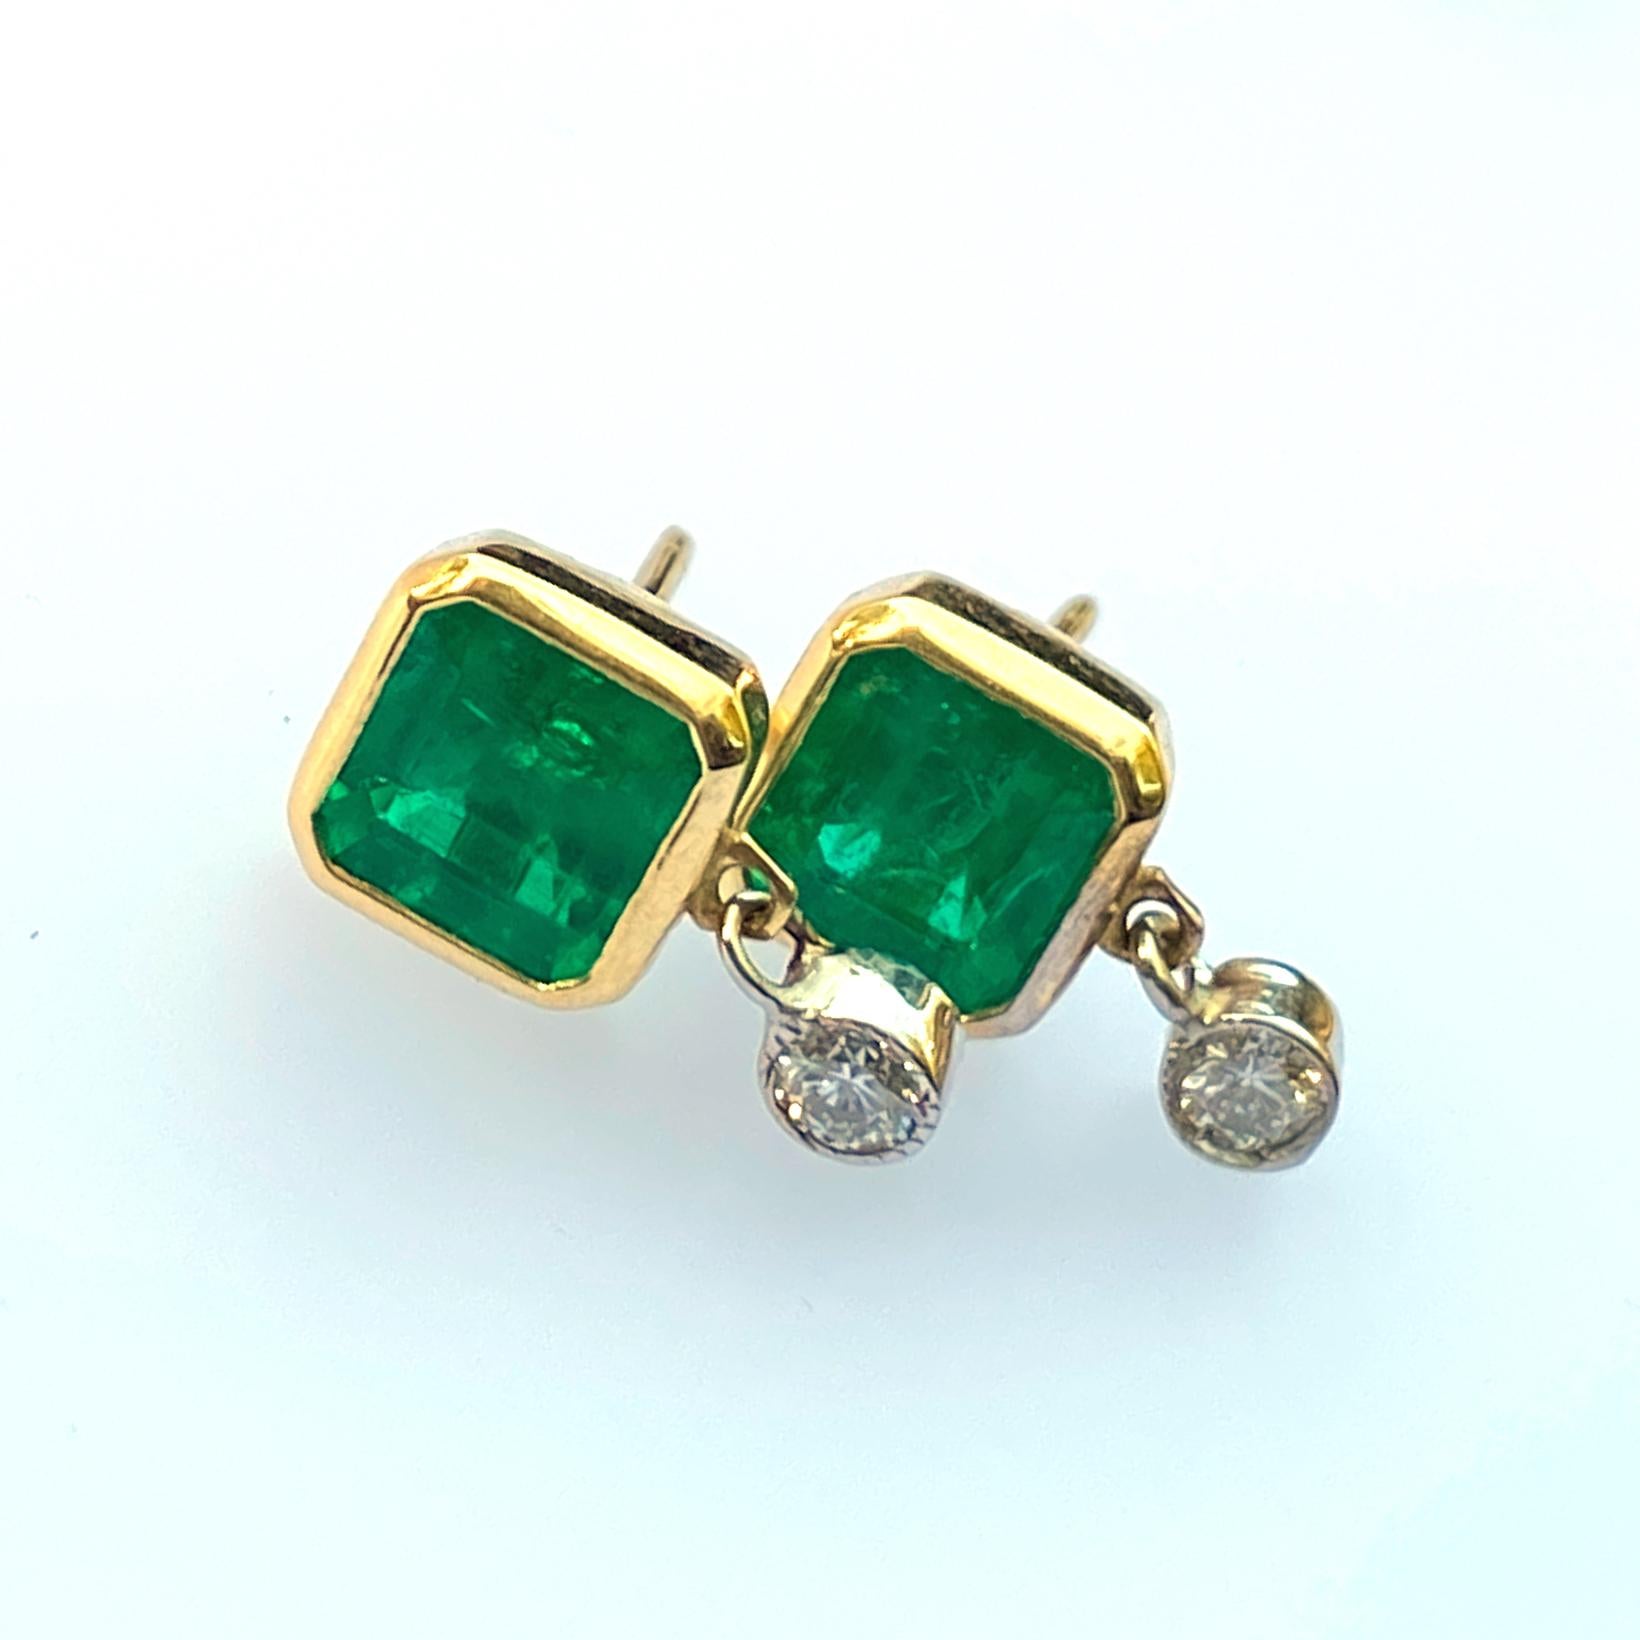 Contemporary 1 Carat Colombian Emerald Earrings in 18 Karat Yellow Gold with Diamond Drops